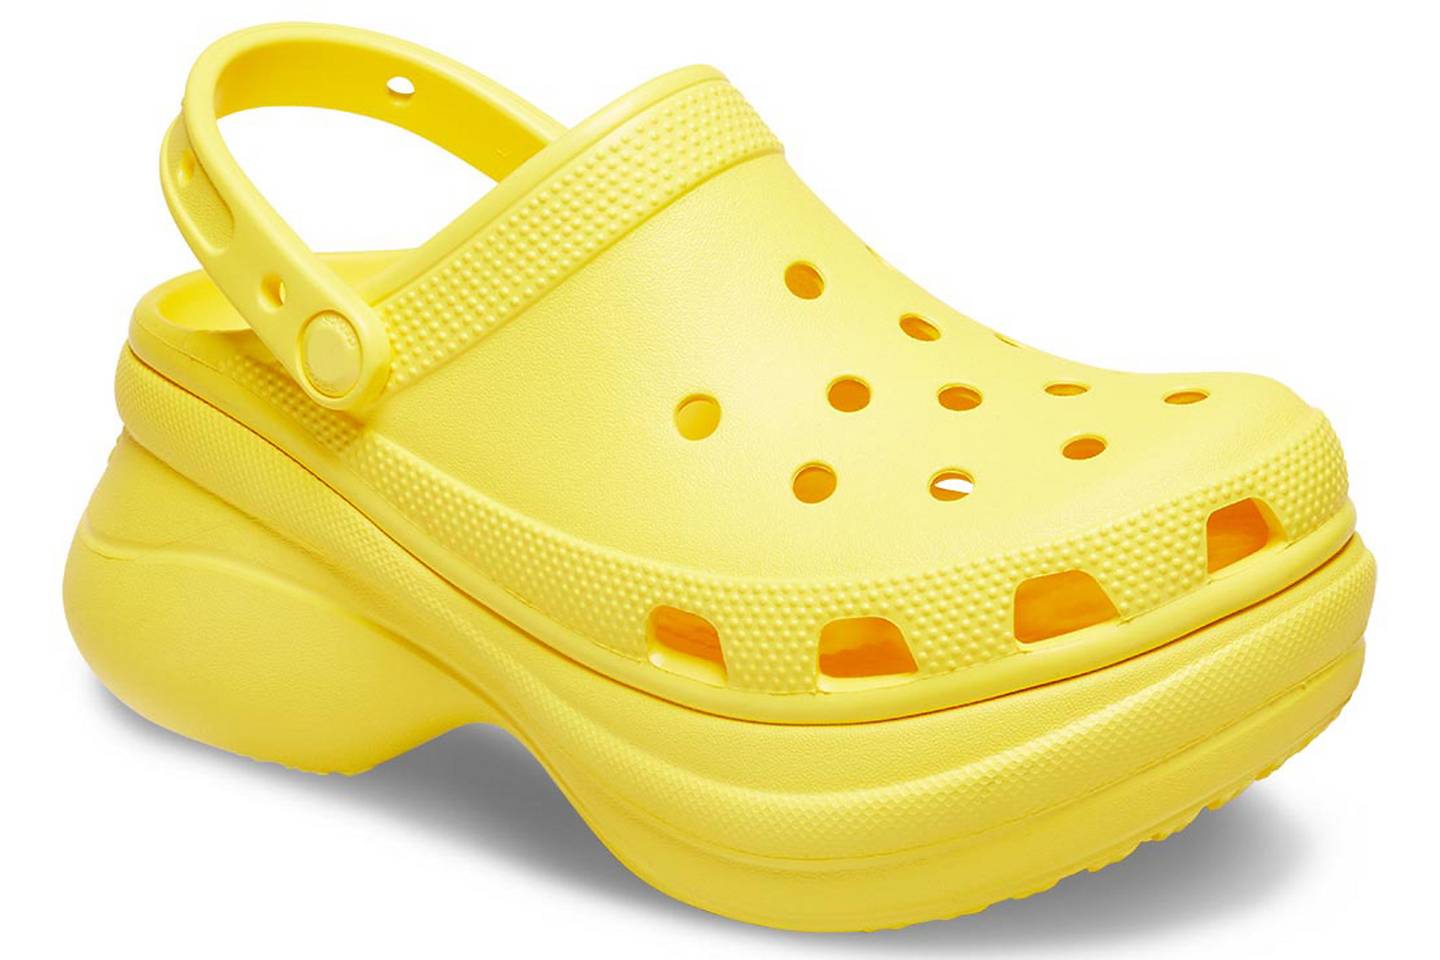 Crocs Are The Divisive Shoes Taking Over Summer 2021 | Glamour UK